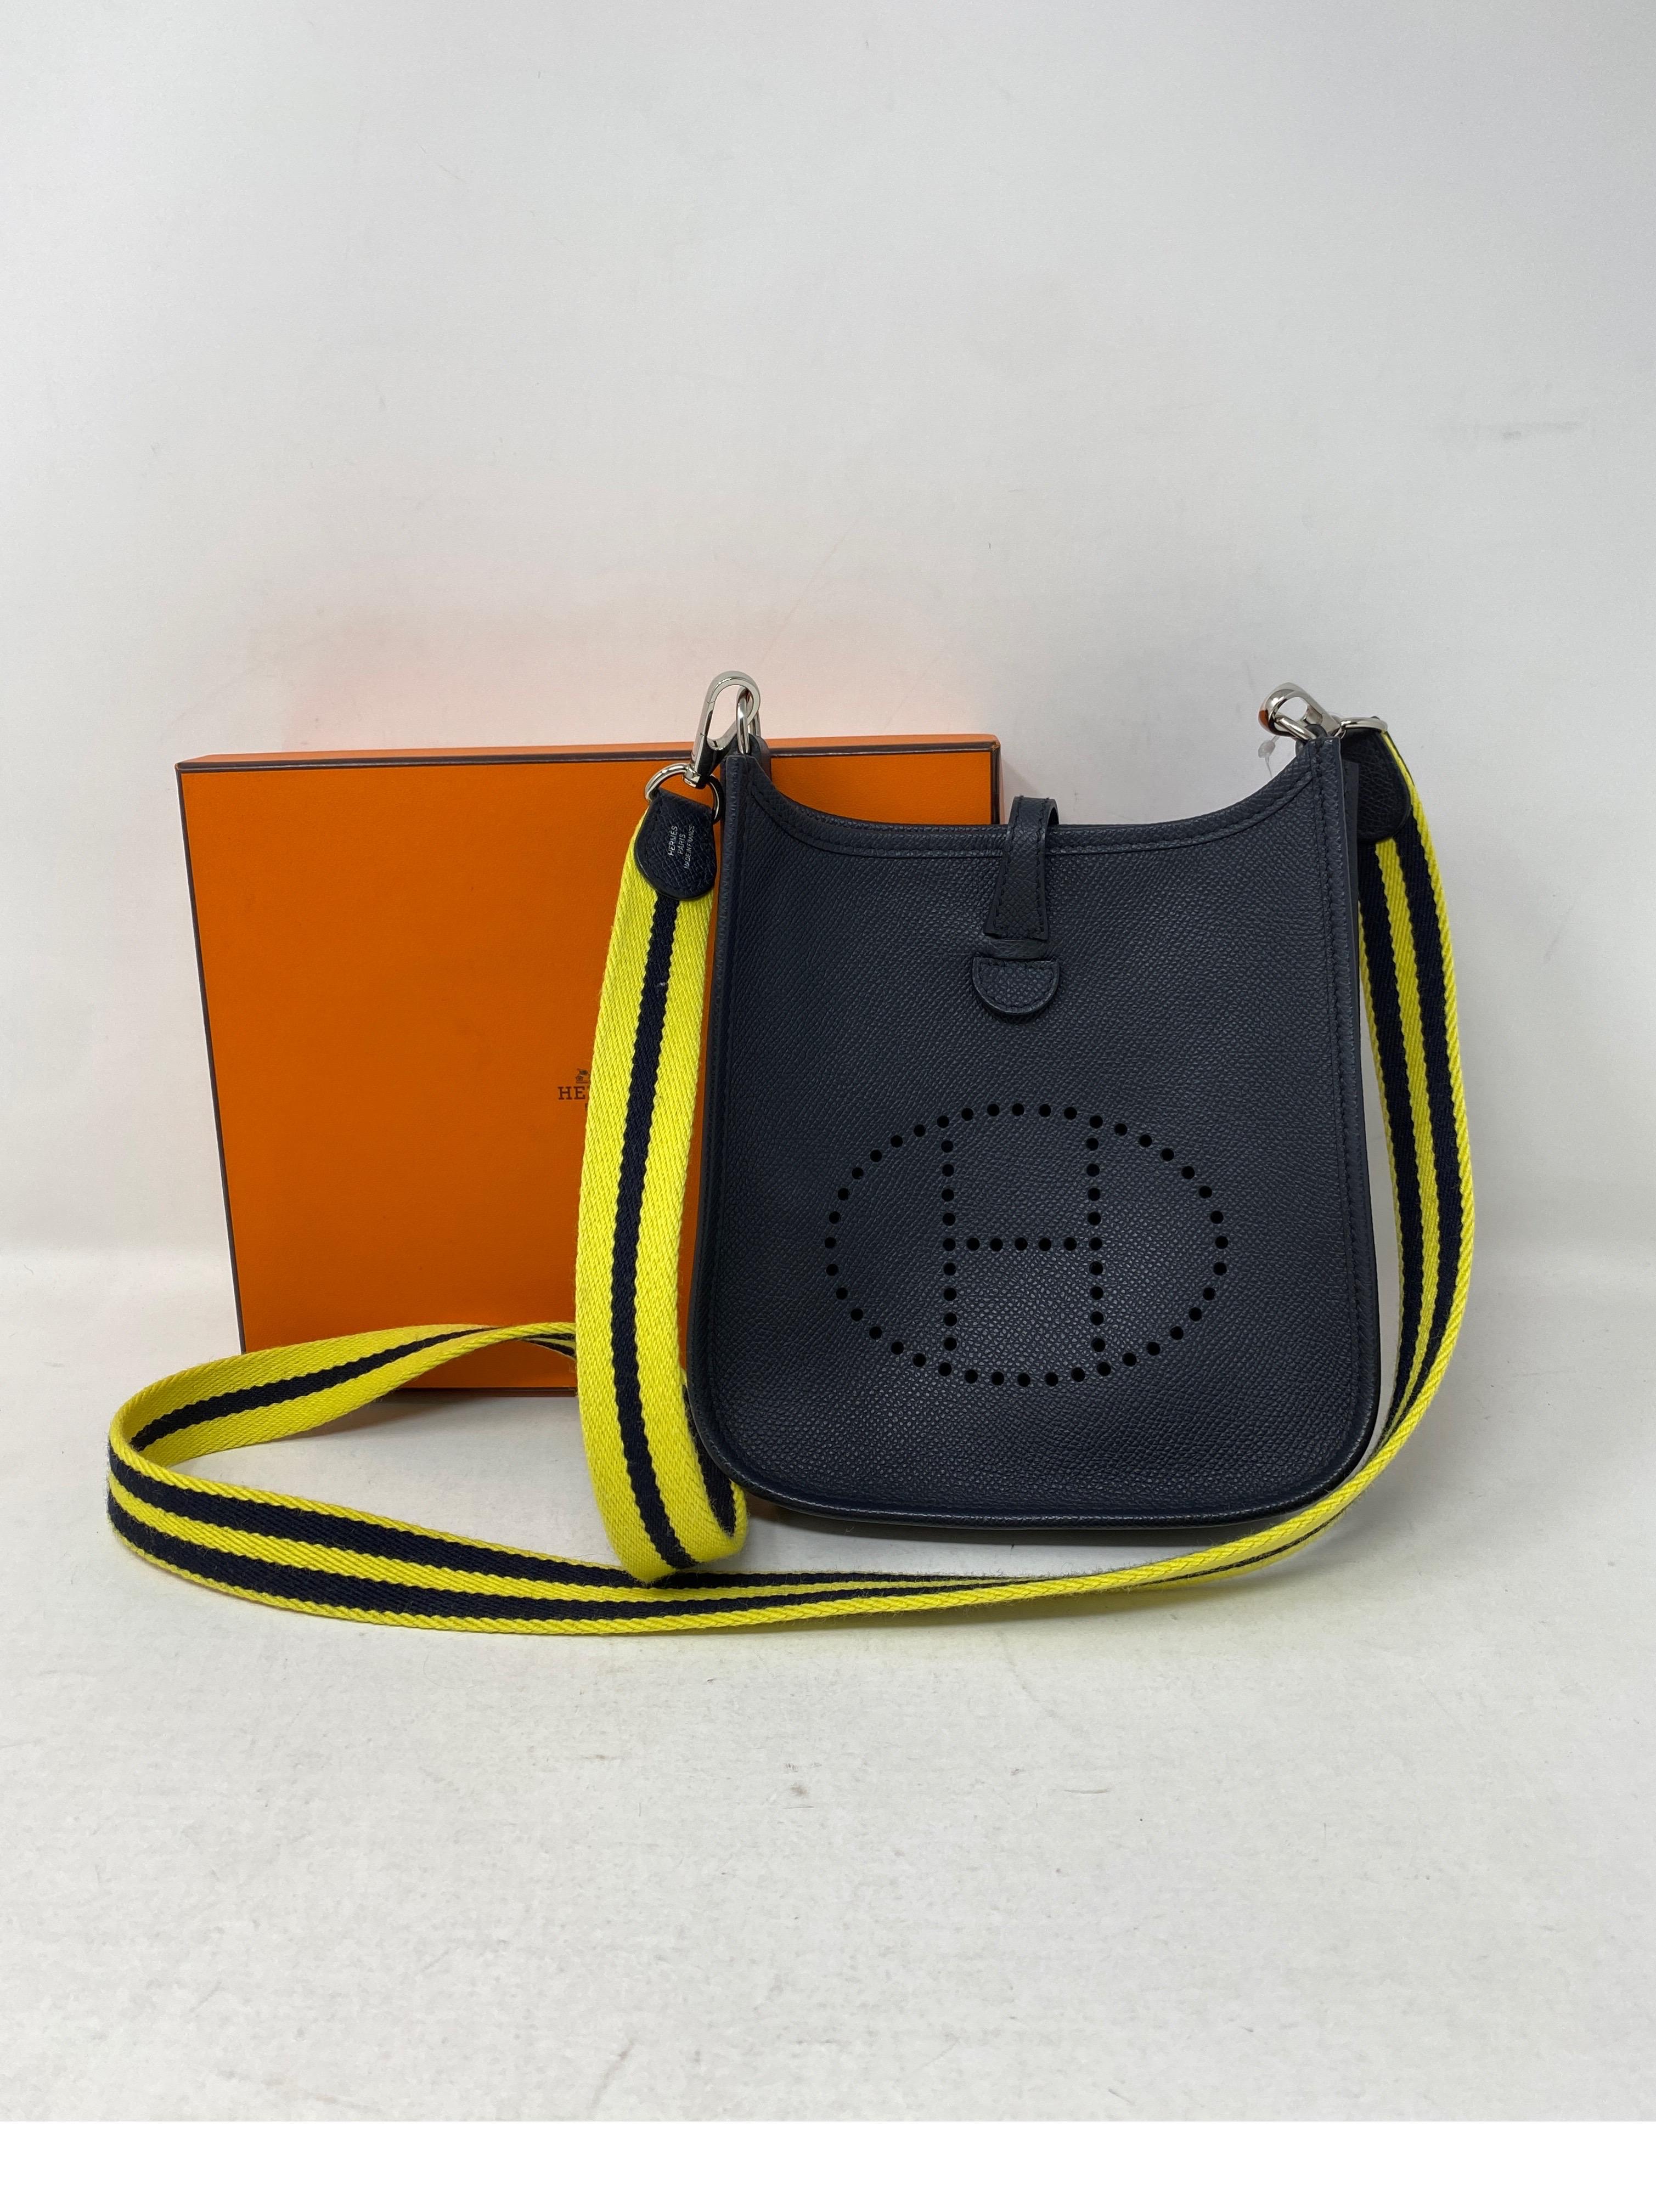 Hermes Evelyne Black TPM Bag. Mini size Hermes Evelyne. Rare and hard to find. Unique yellow and black stripe strap. Mint condition like new. Includes Hermes Box. Guaranteed authentic. 